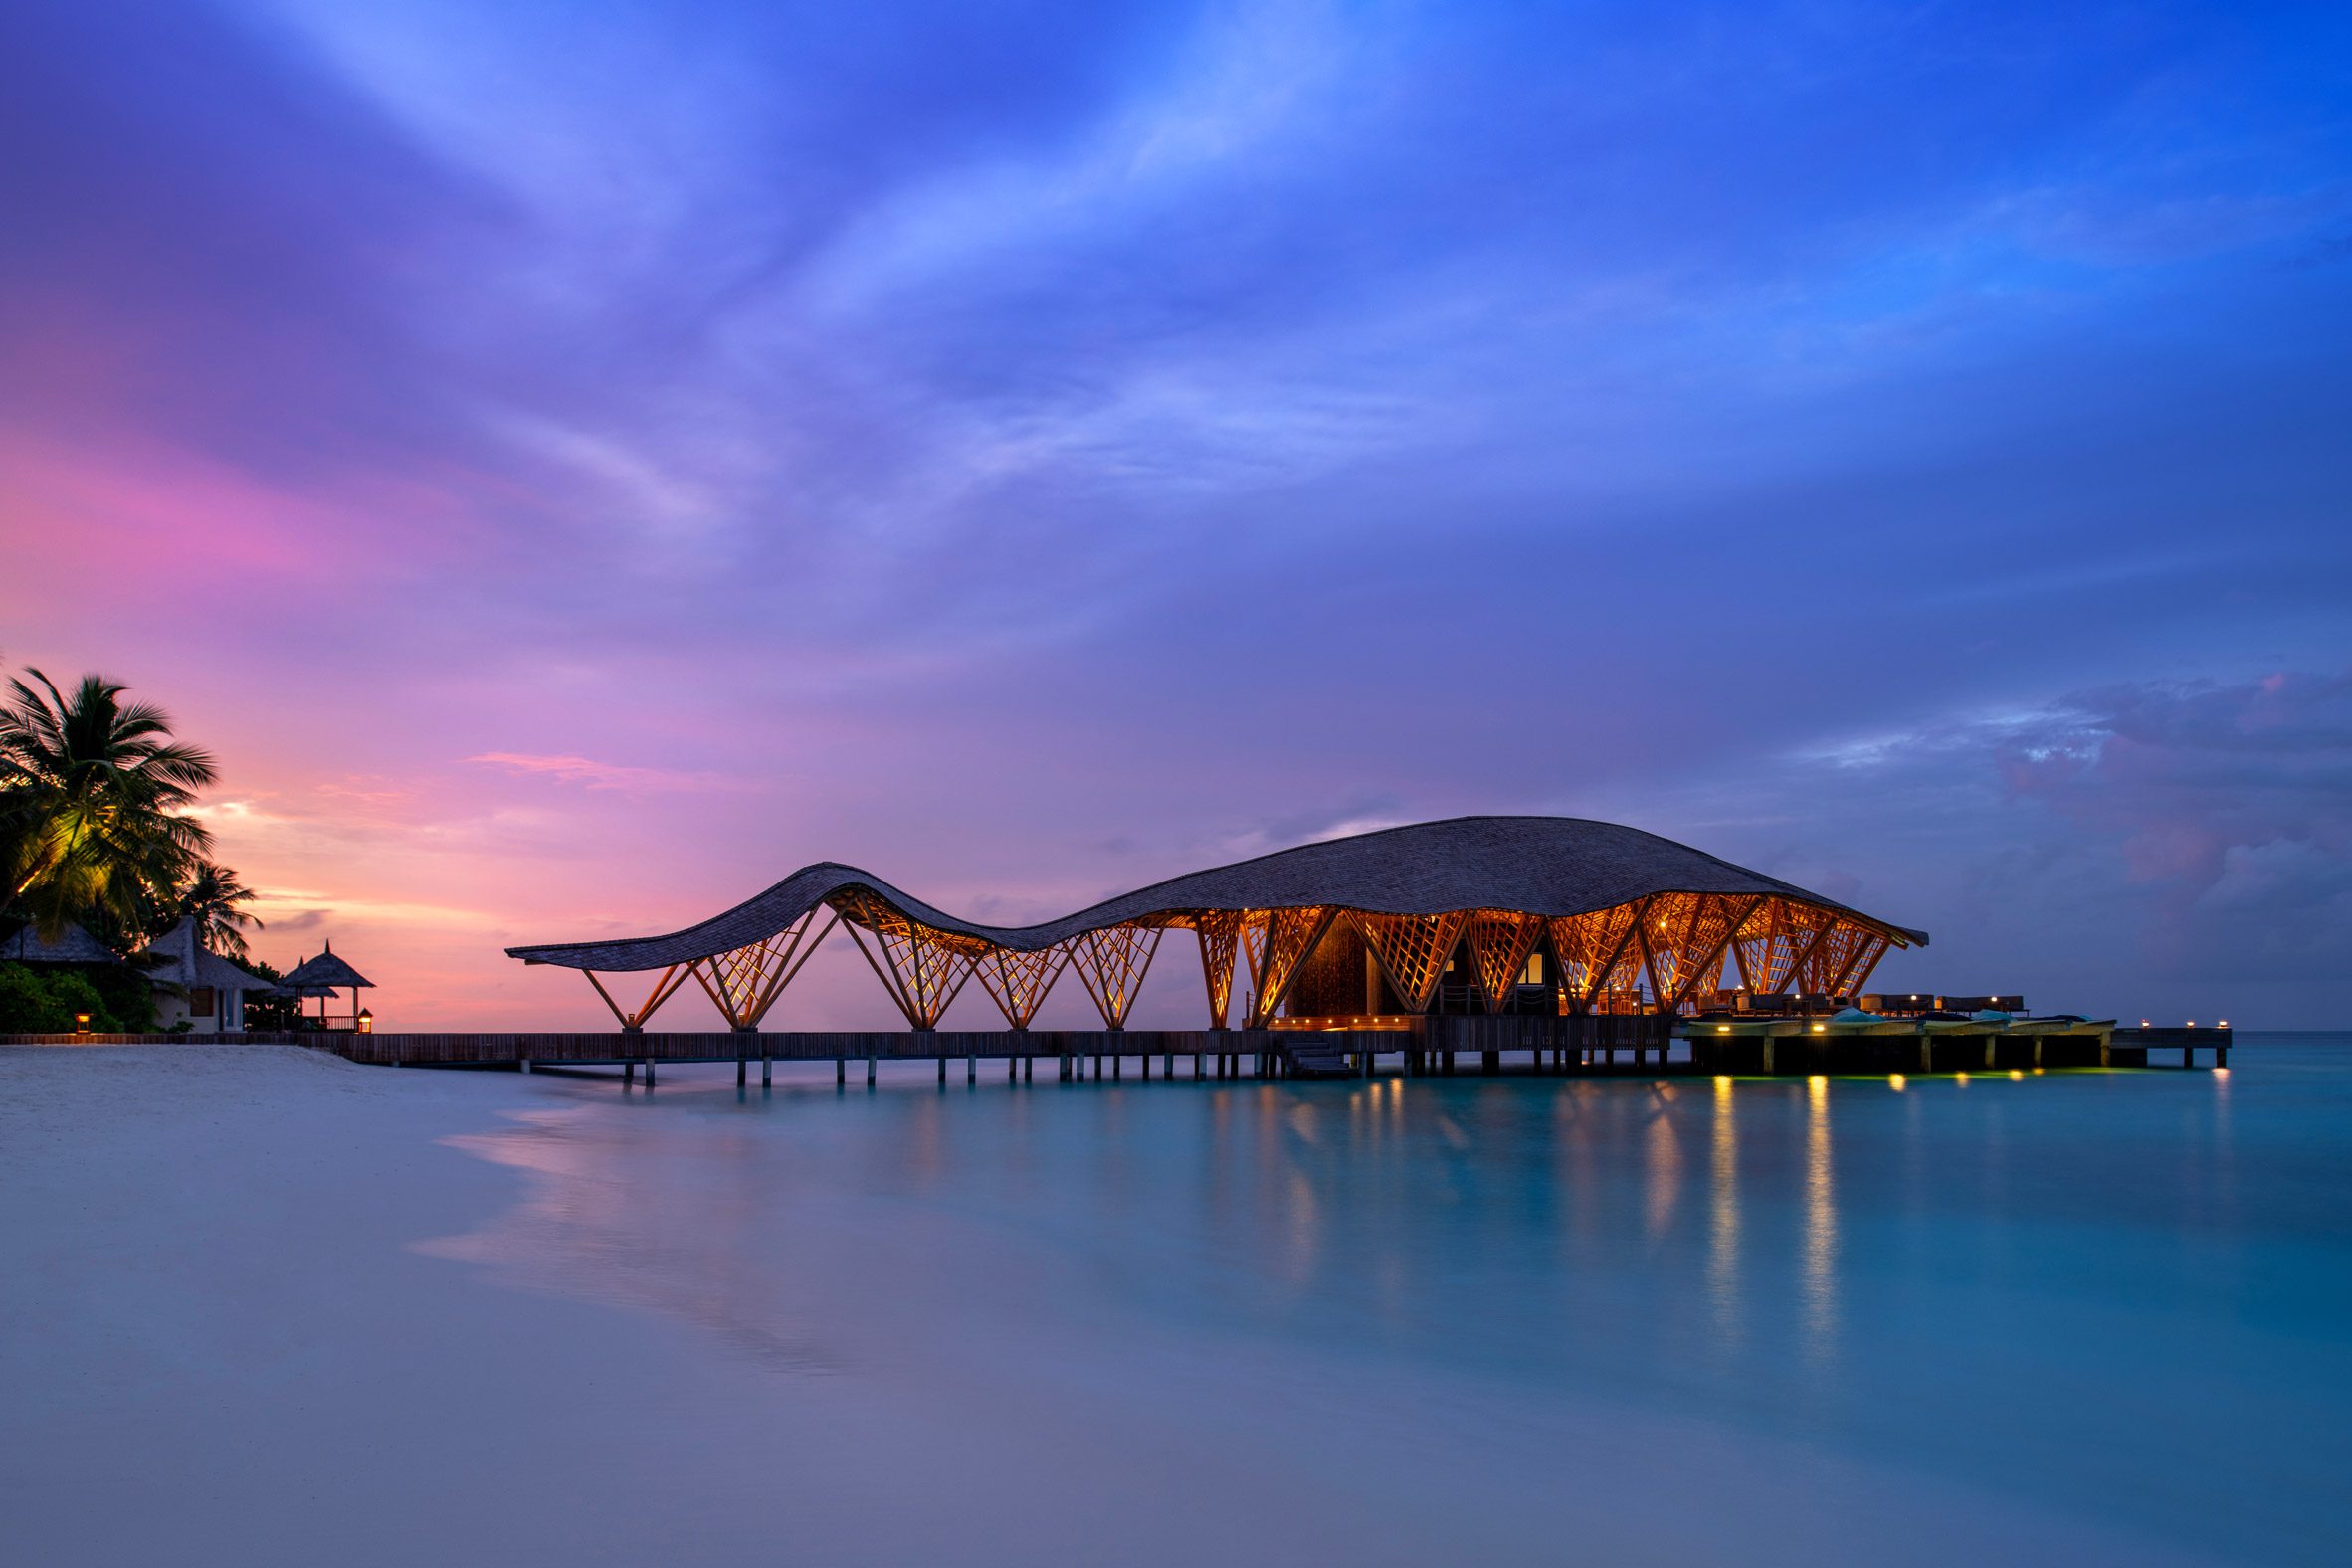 View of Overwater Restaurant at night by Atelier Nomadic